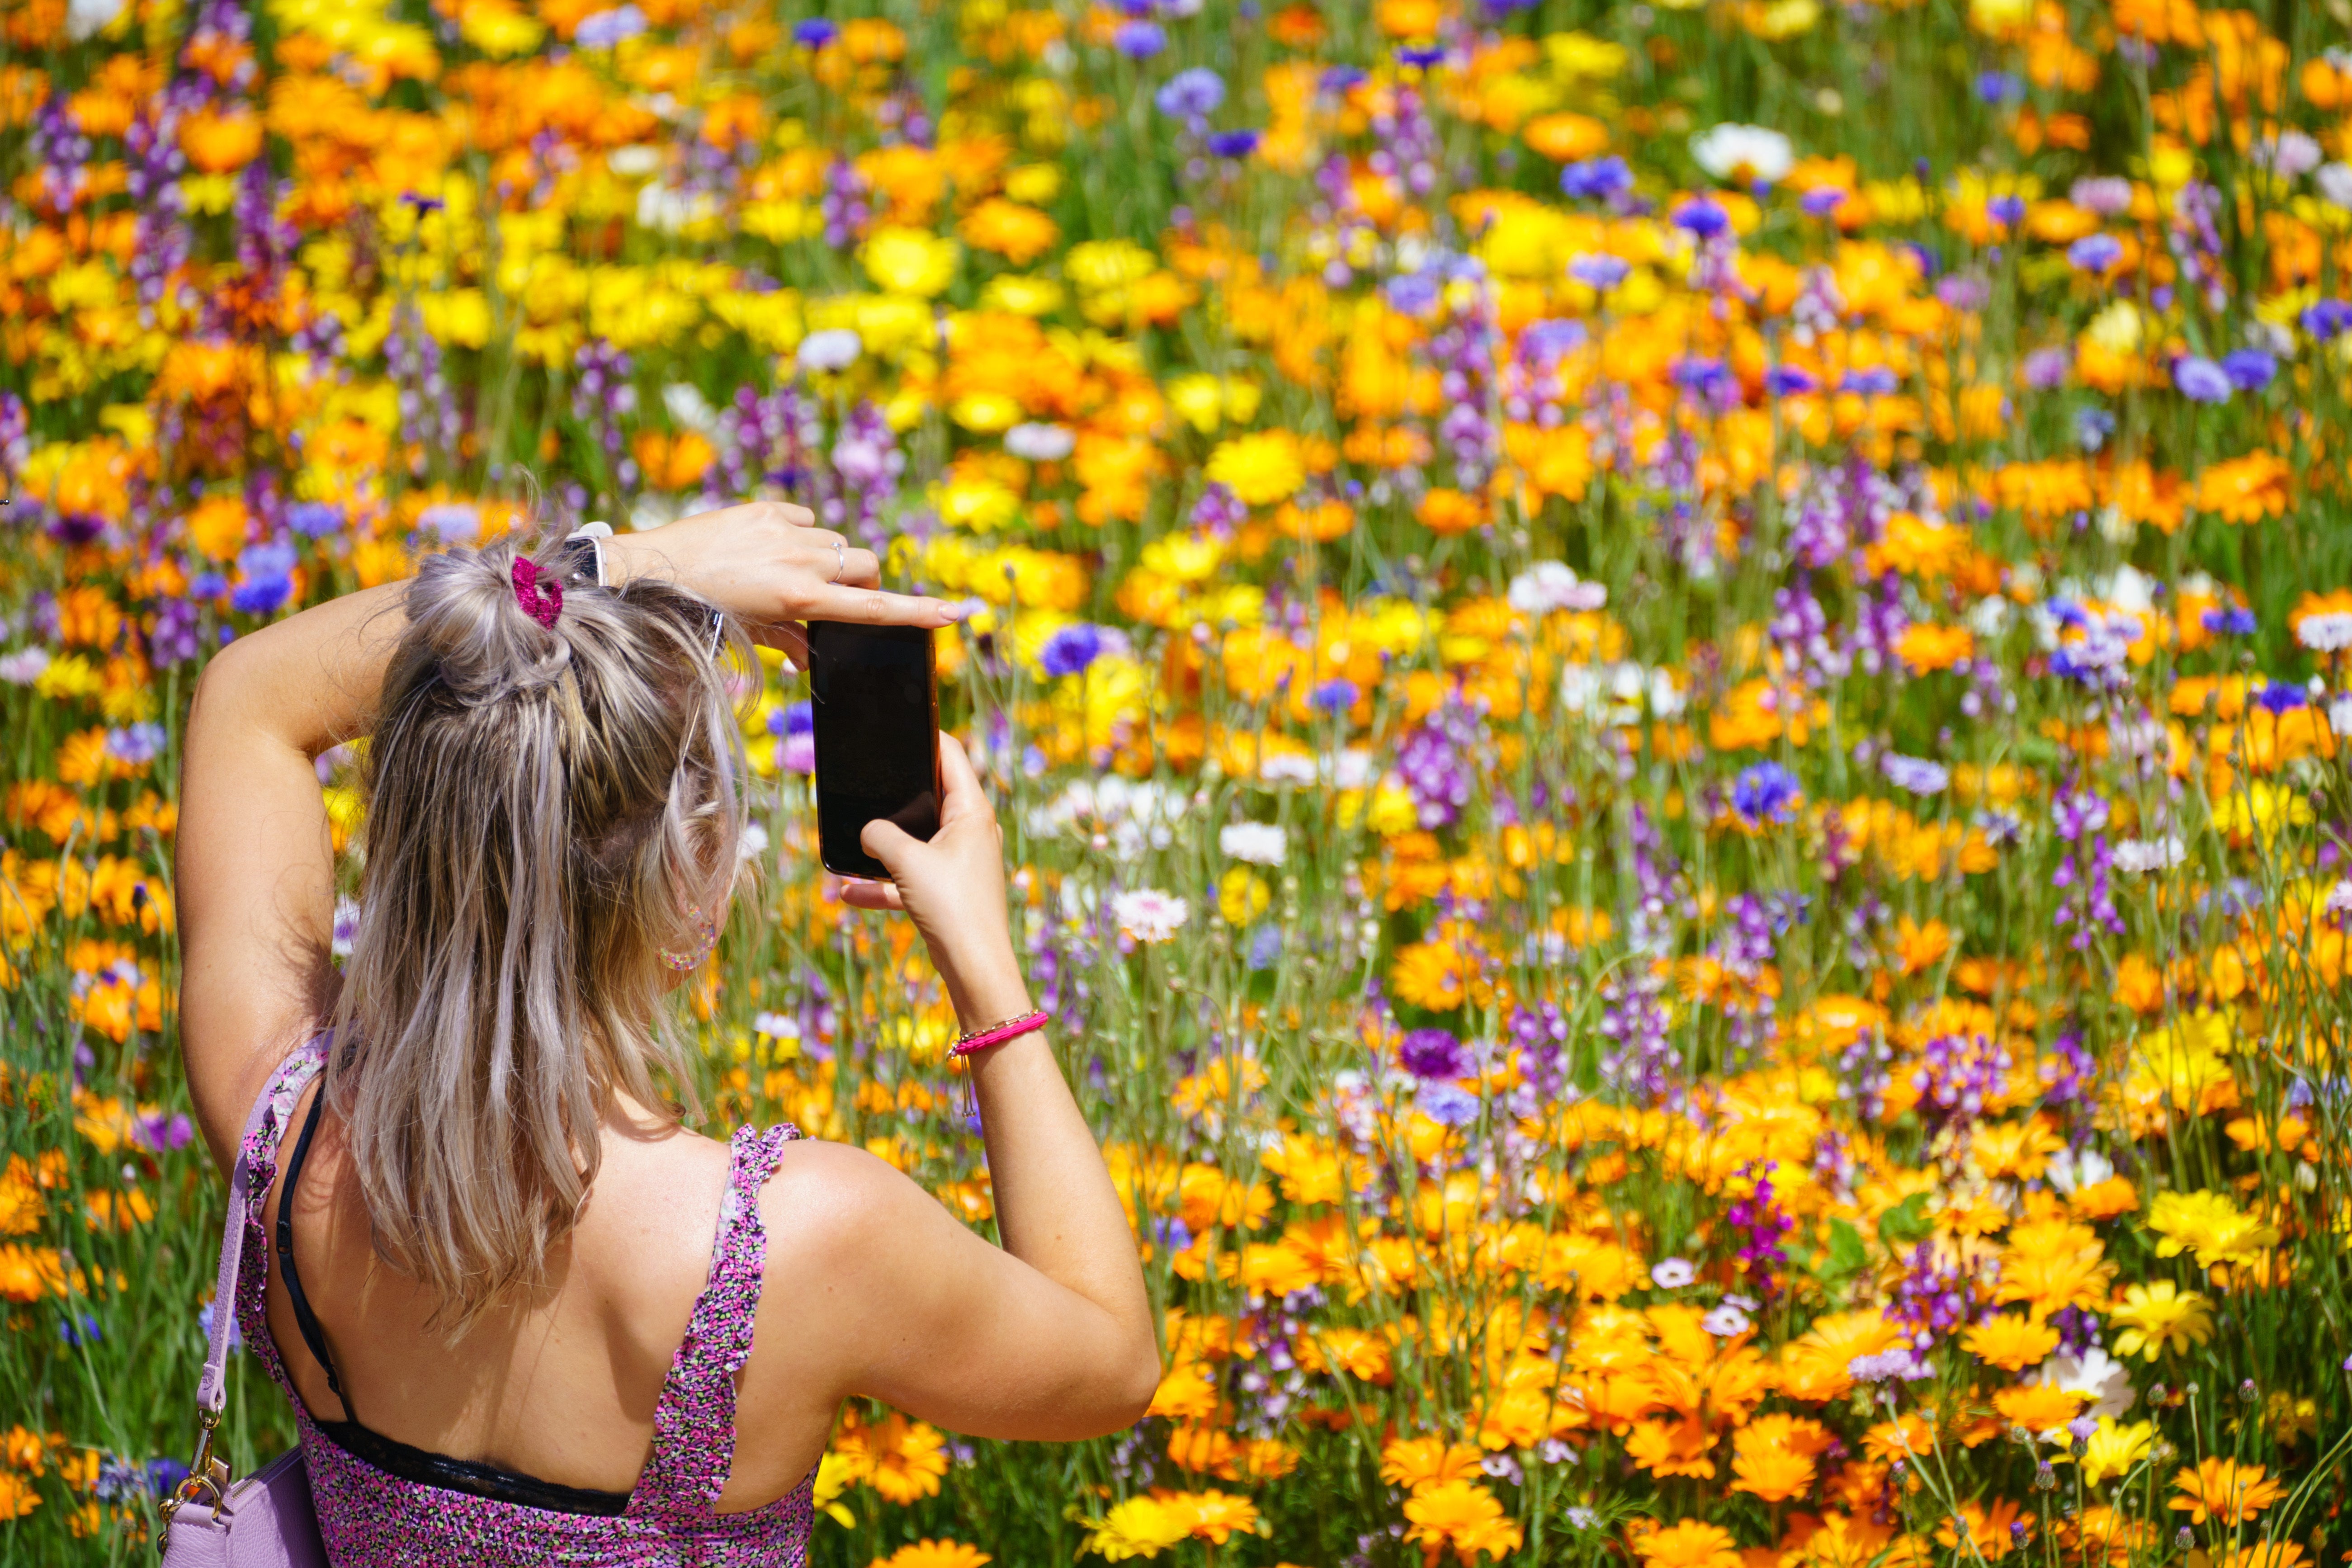 A visitor takes a photo of the flowers of the ‘Superbloom’ garden in the moat of the Tower of London, in London (Dominic Lipinski/PA)